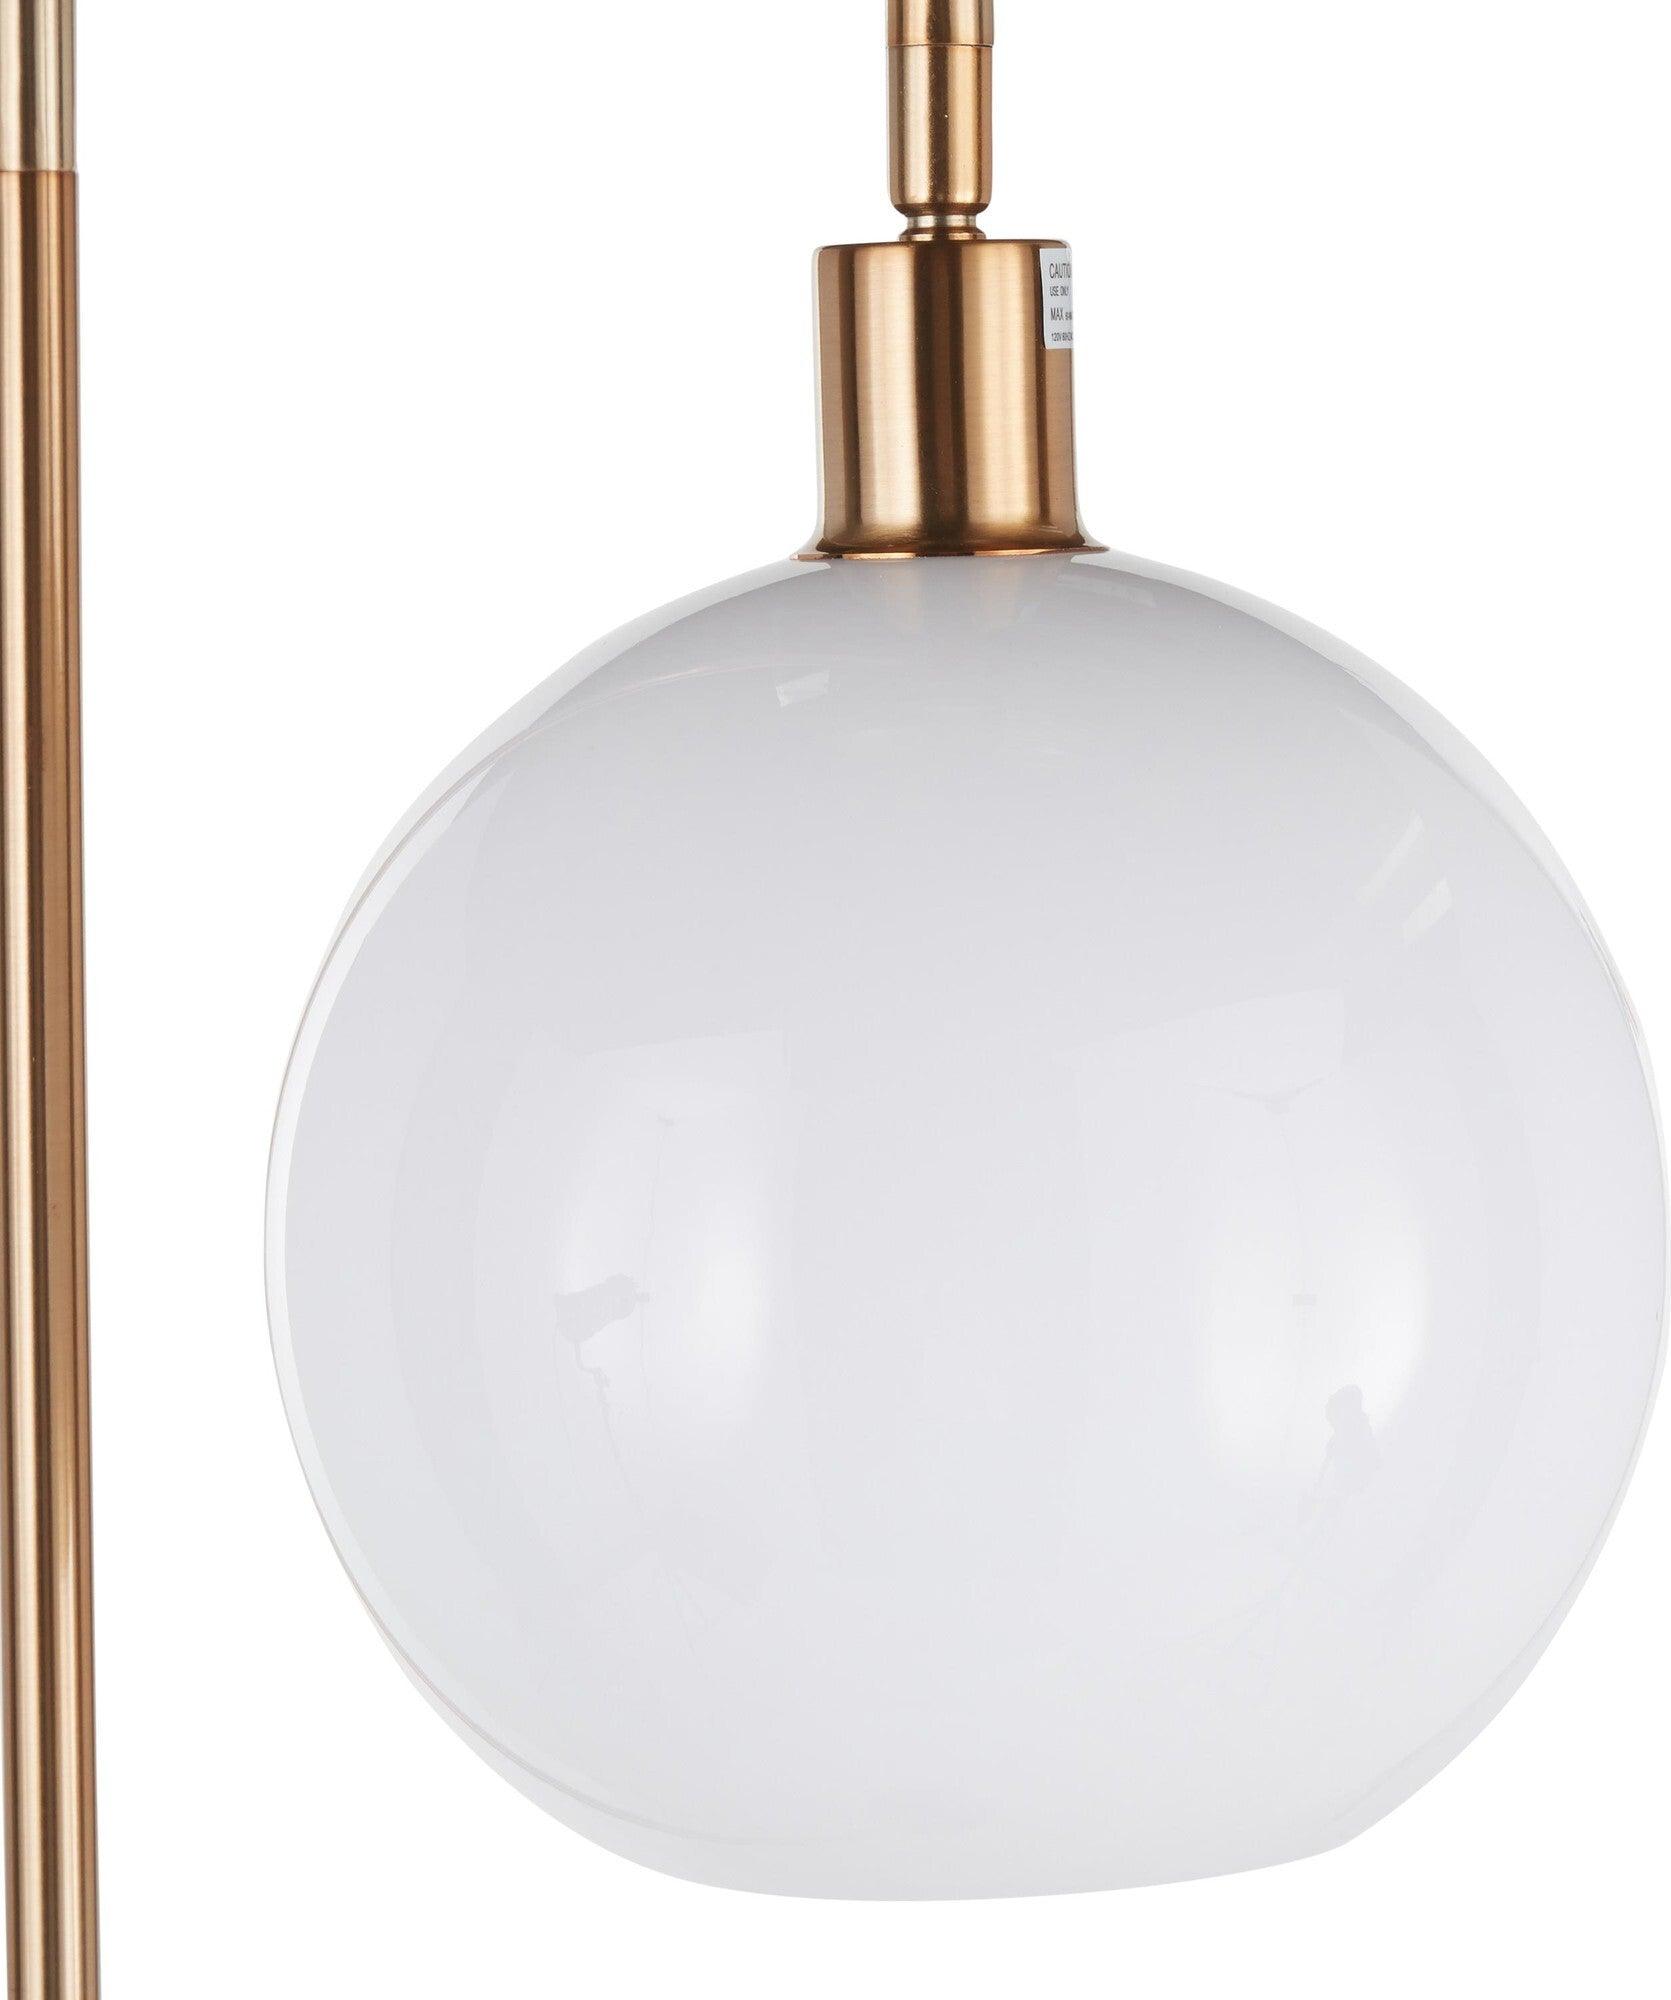 Lumisource Floor Lamps - Trombone Floor Lamp with Table Gold & White